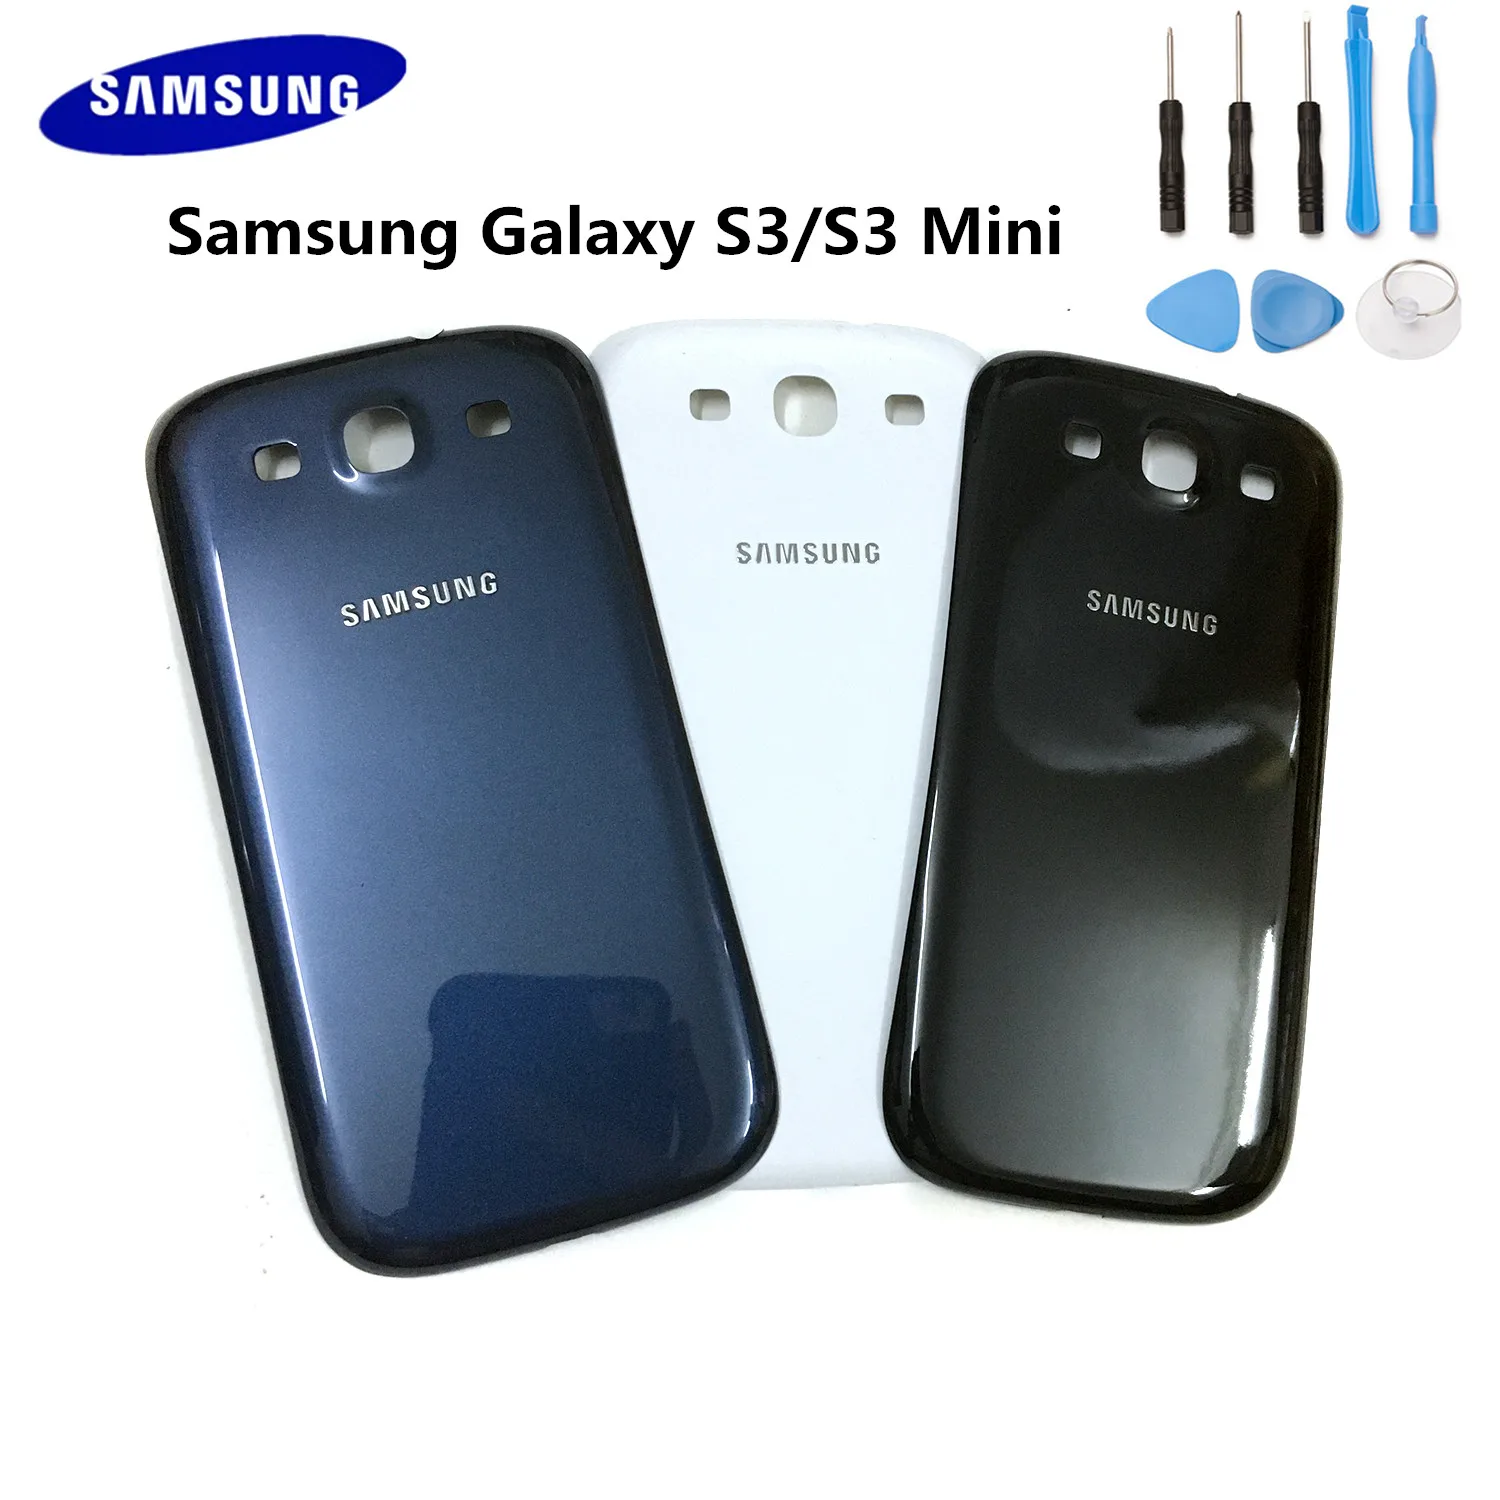 

Original Samsung Galaxy S3 i9308/i9305 S3 Mini i8190 Glass Housing Battery Back Cover Rear Door Case+Replacement Part Free Tools